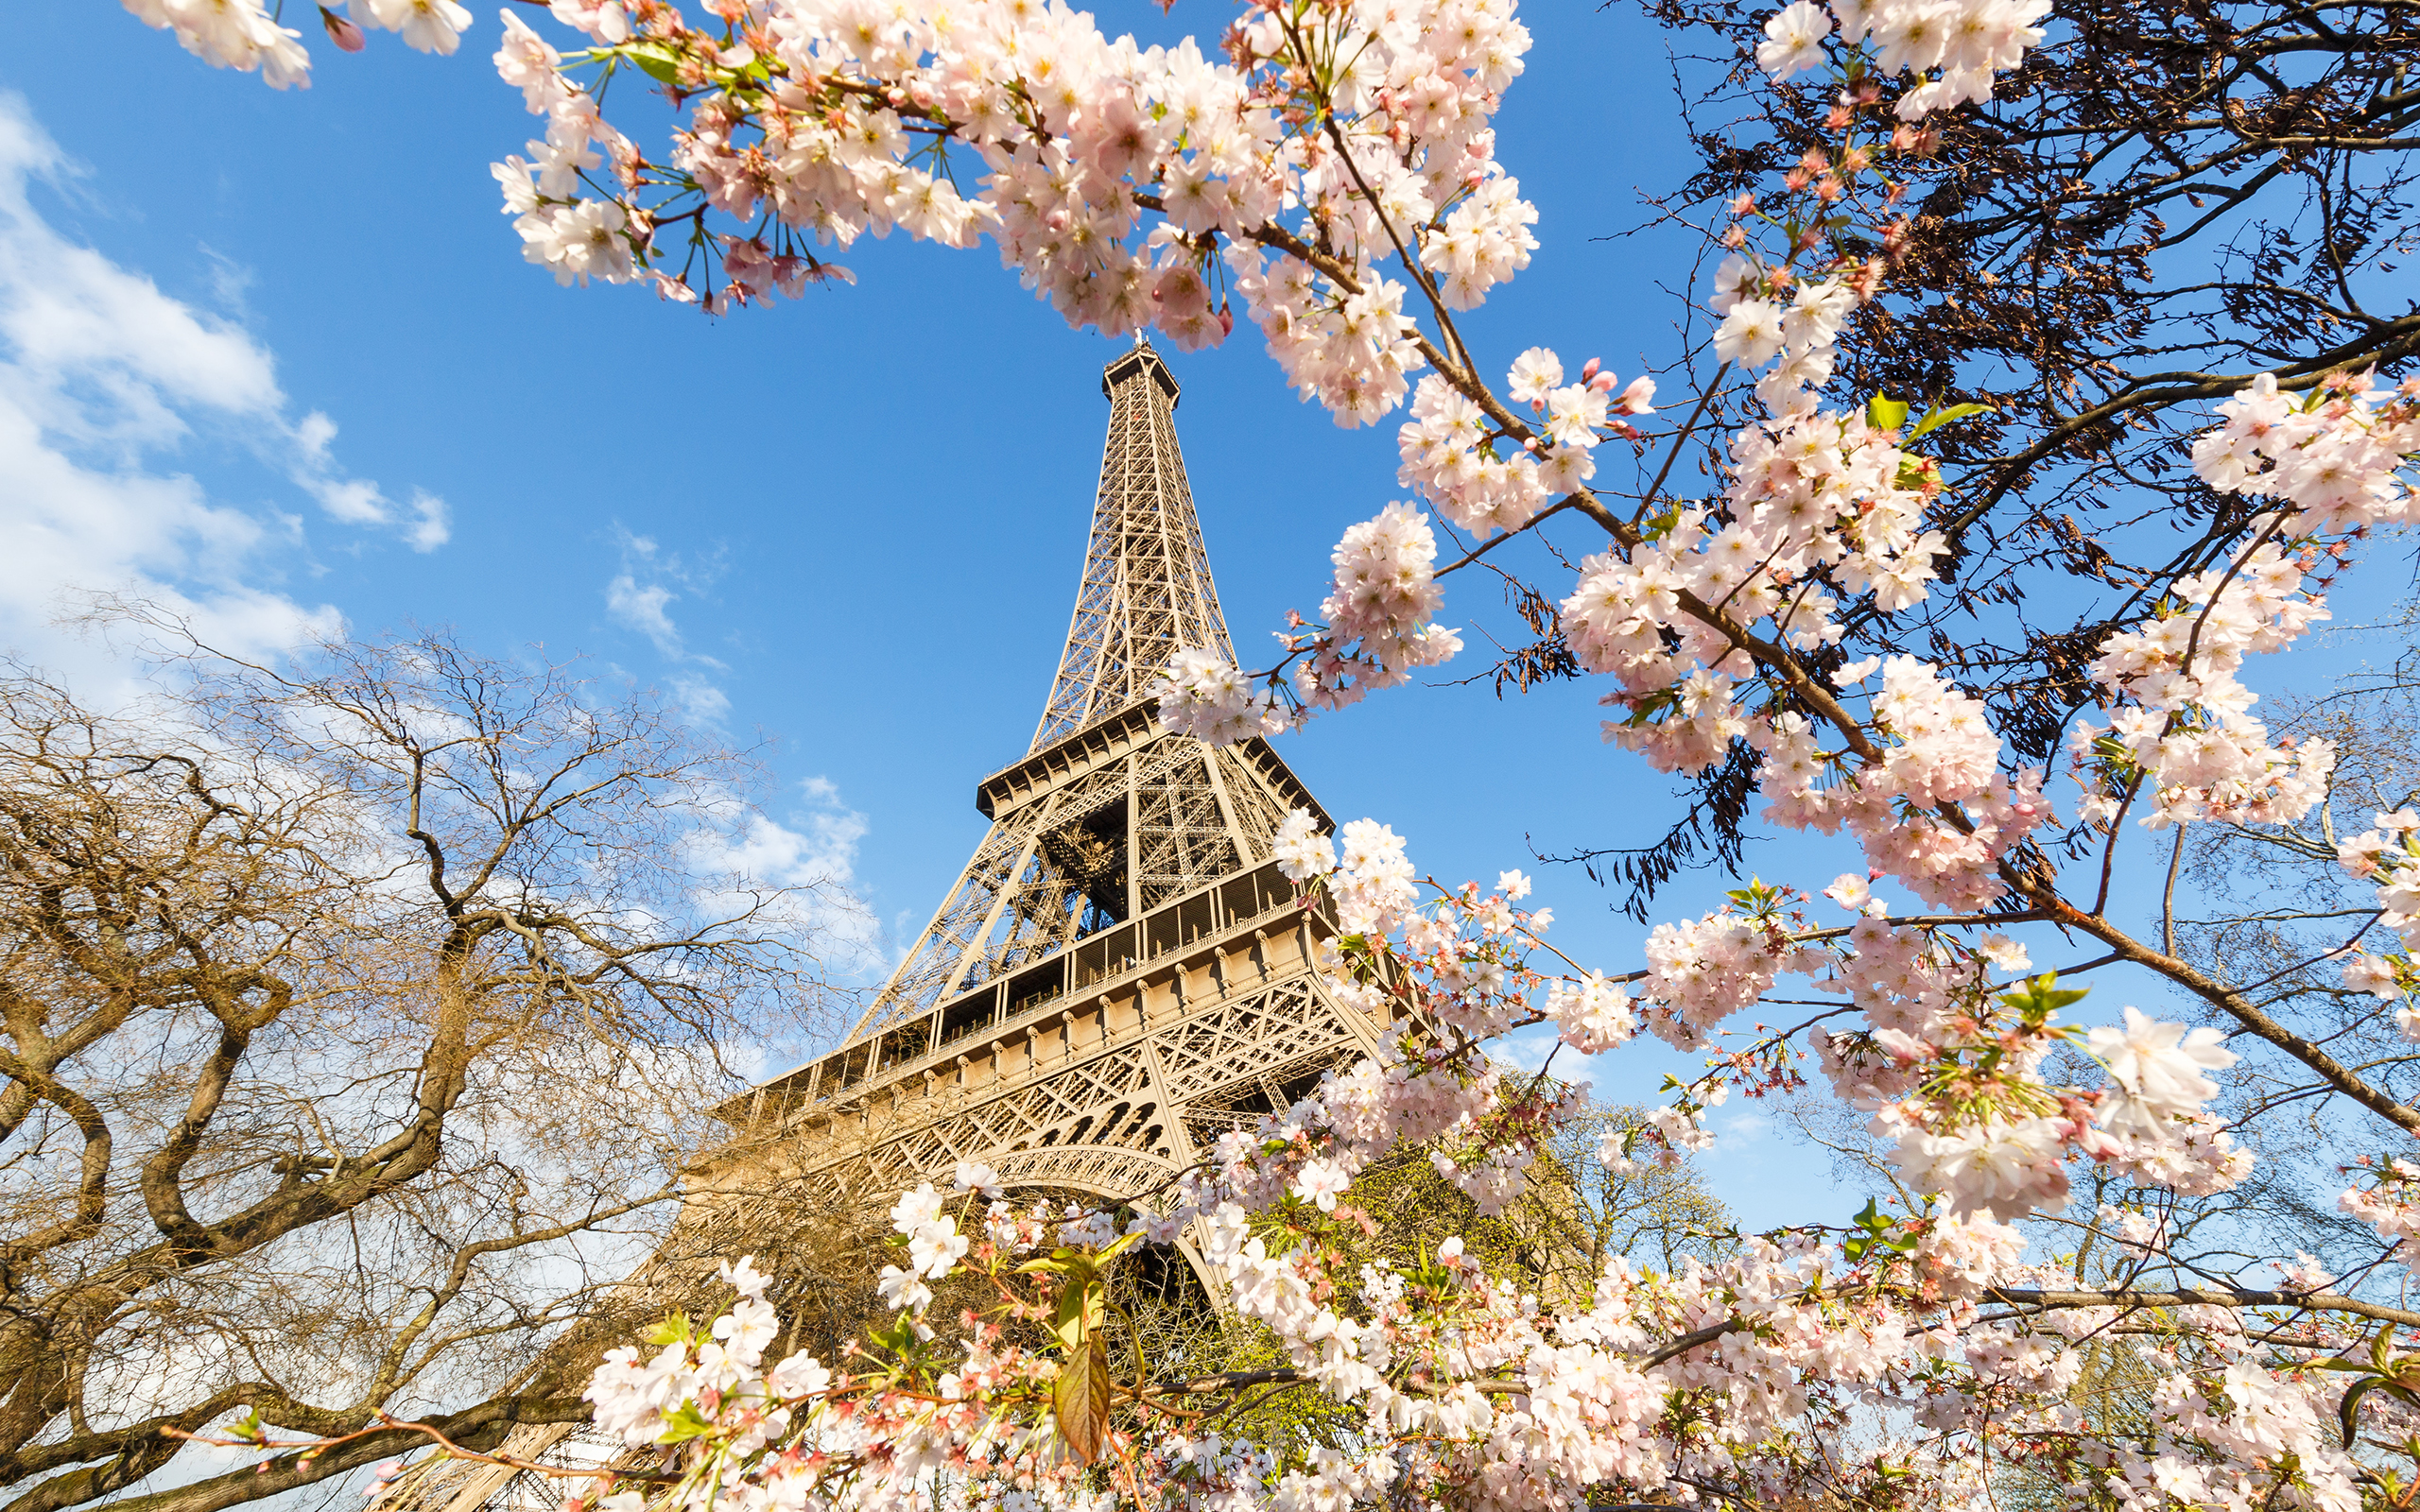 paris, spring, blossom, pink flower, eiffel tower, man made, france, monument, monuments HD wallpaper